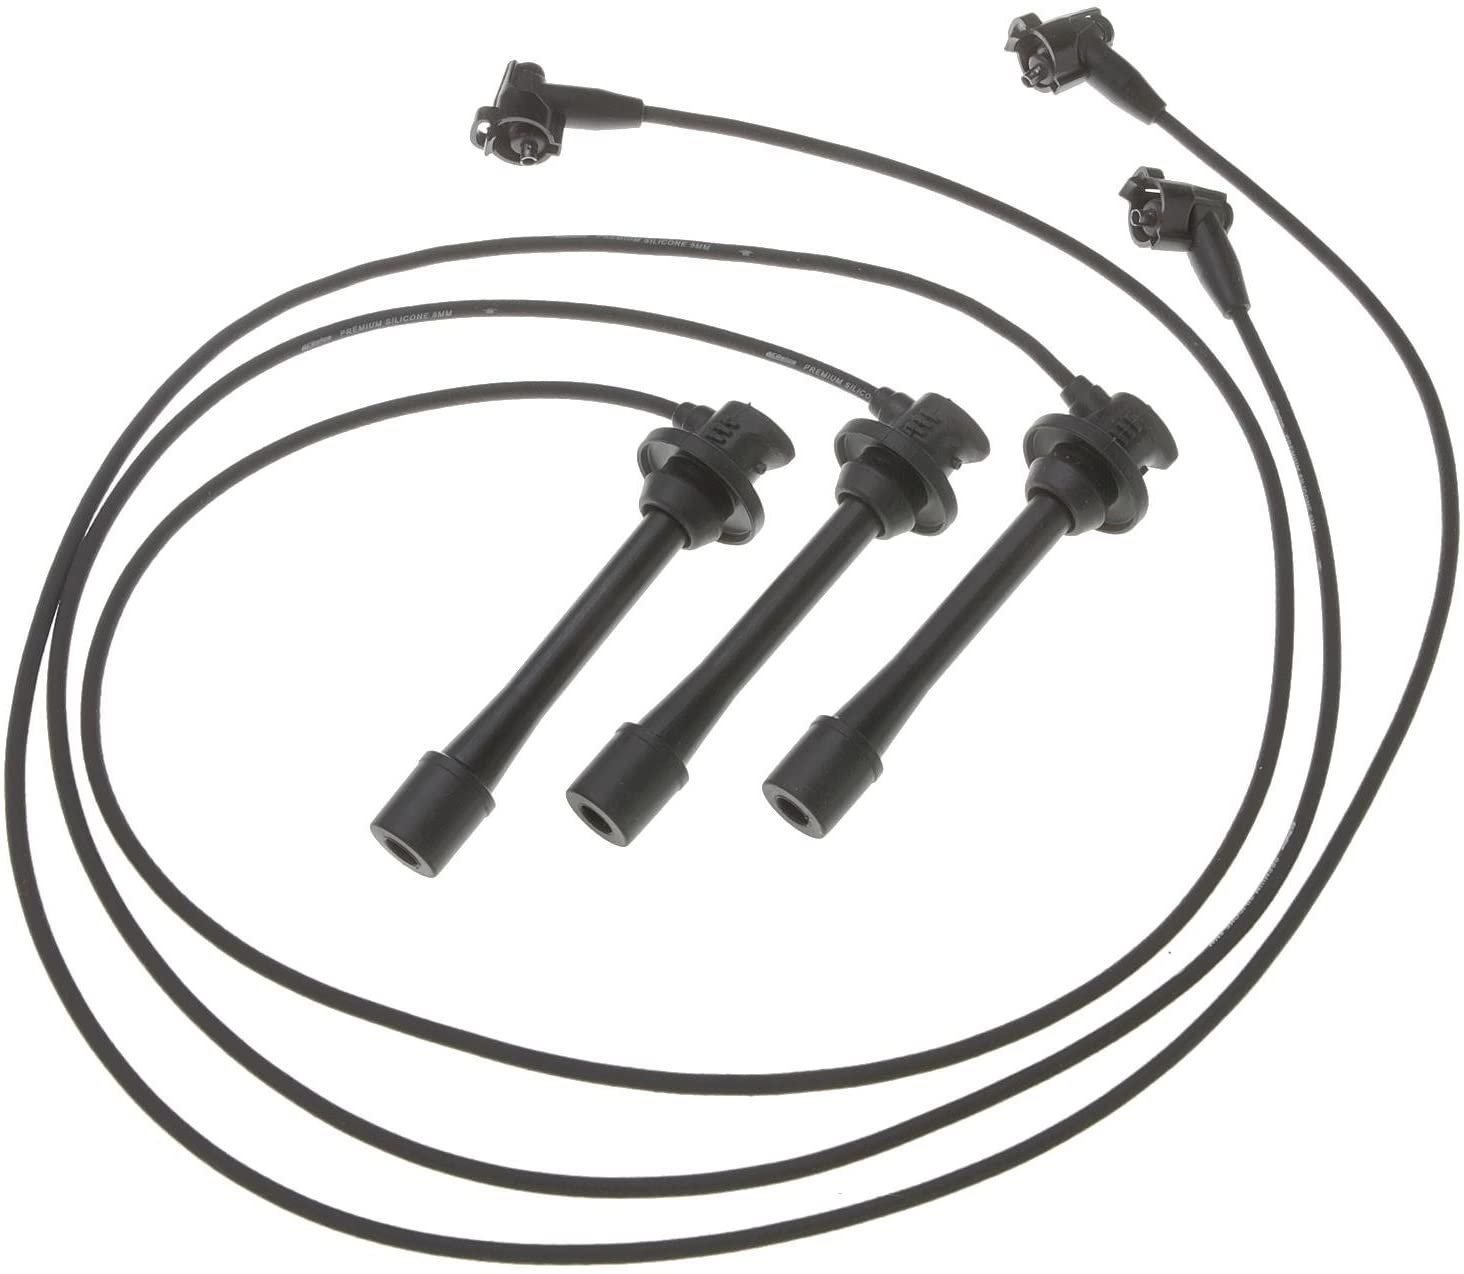 ACDelco 936R Professional Spark Plug Wire Set